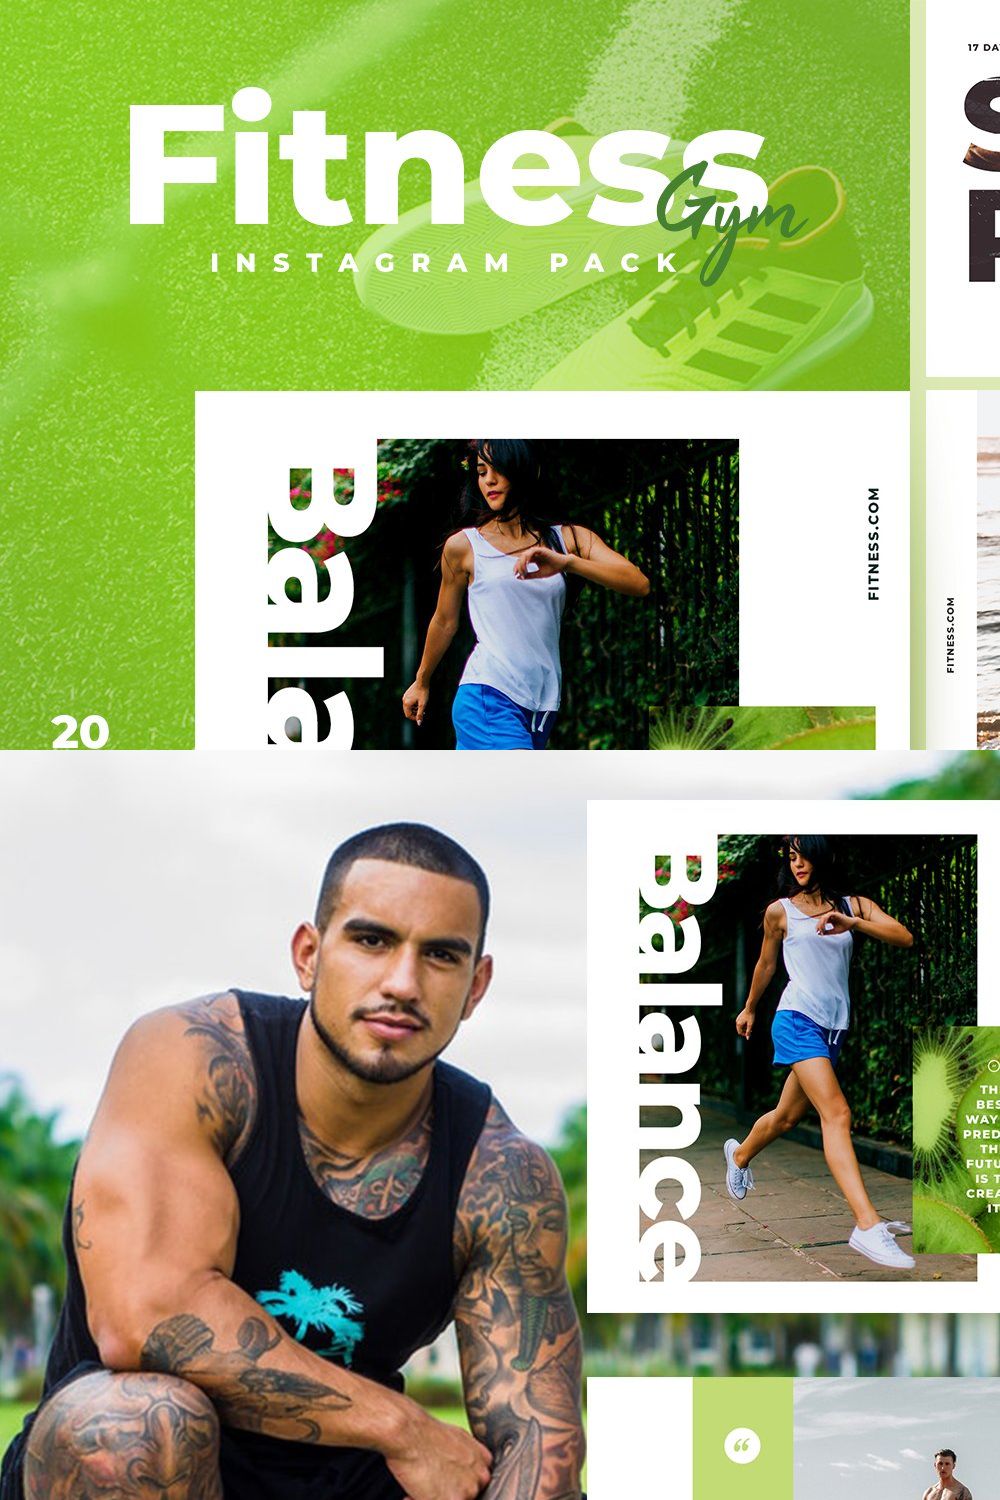 Fitness & Gym instagram pack pinterest preview image.